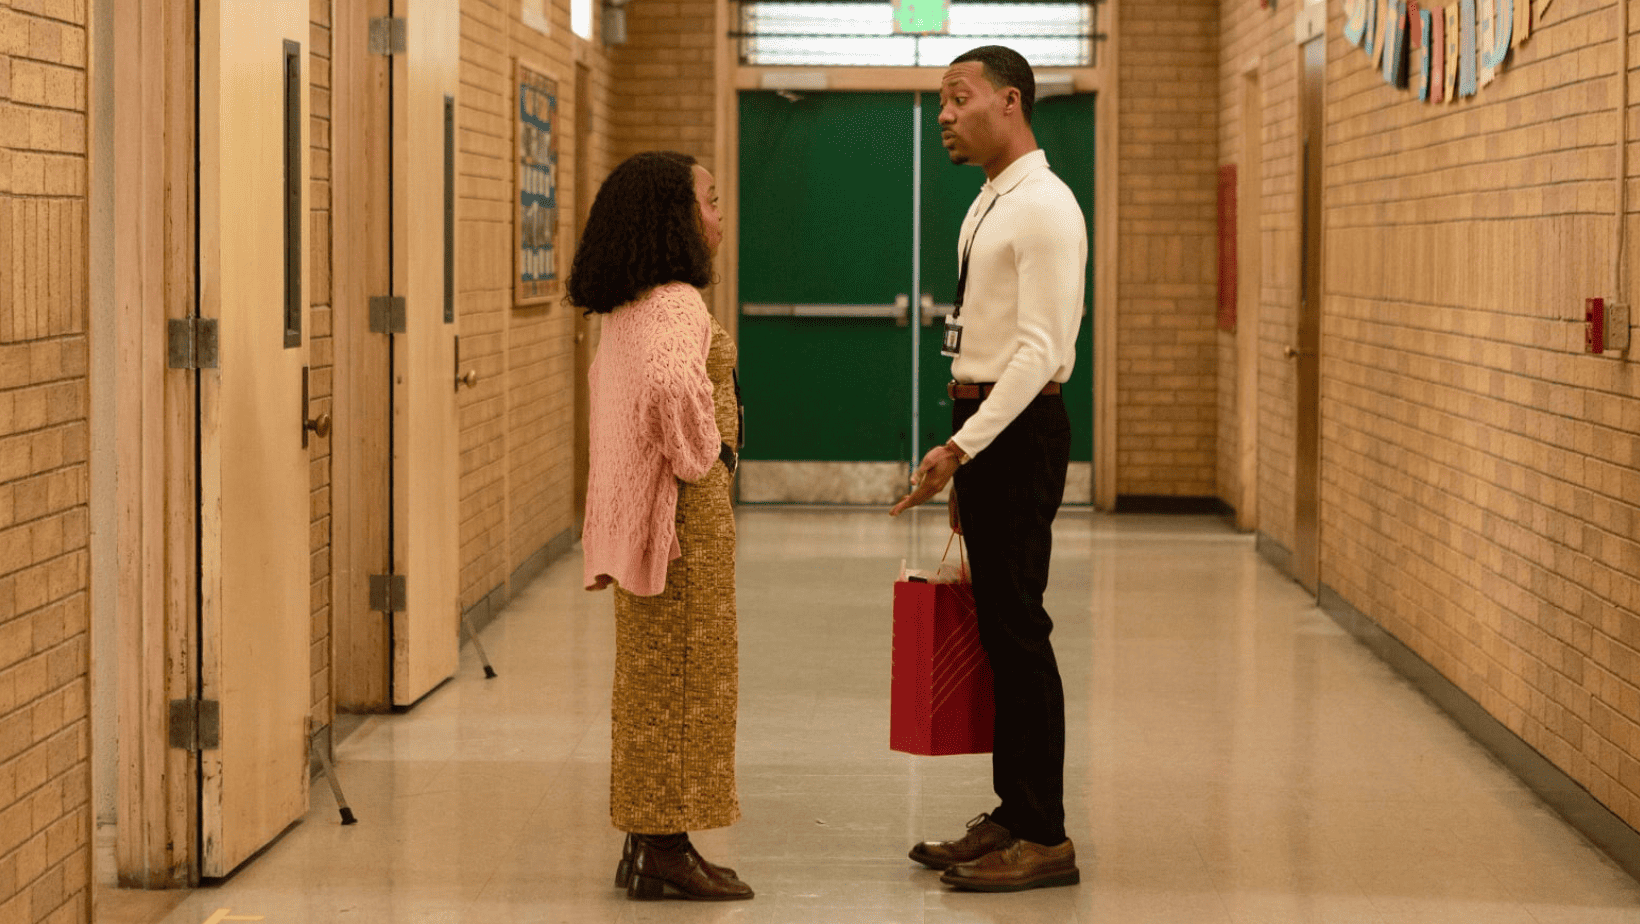 A couple stands facing each other in a school corridor in this image from Warner Bros. Television.